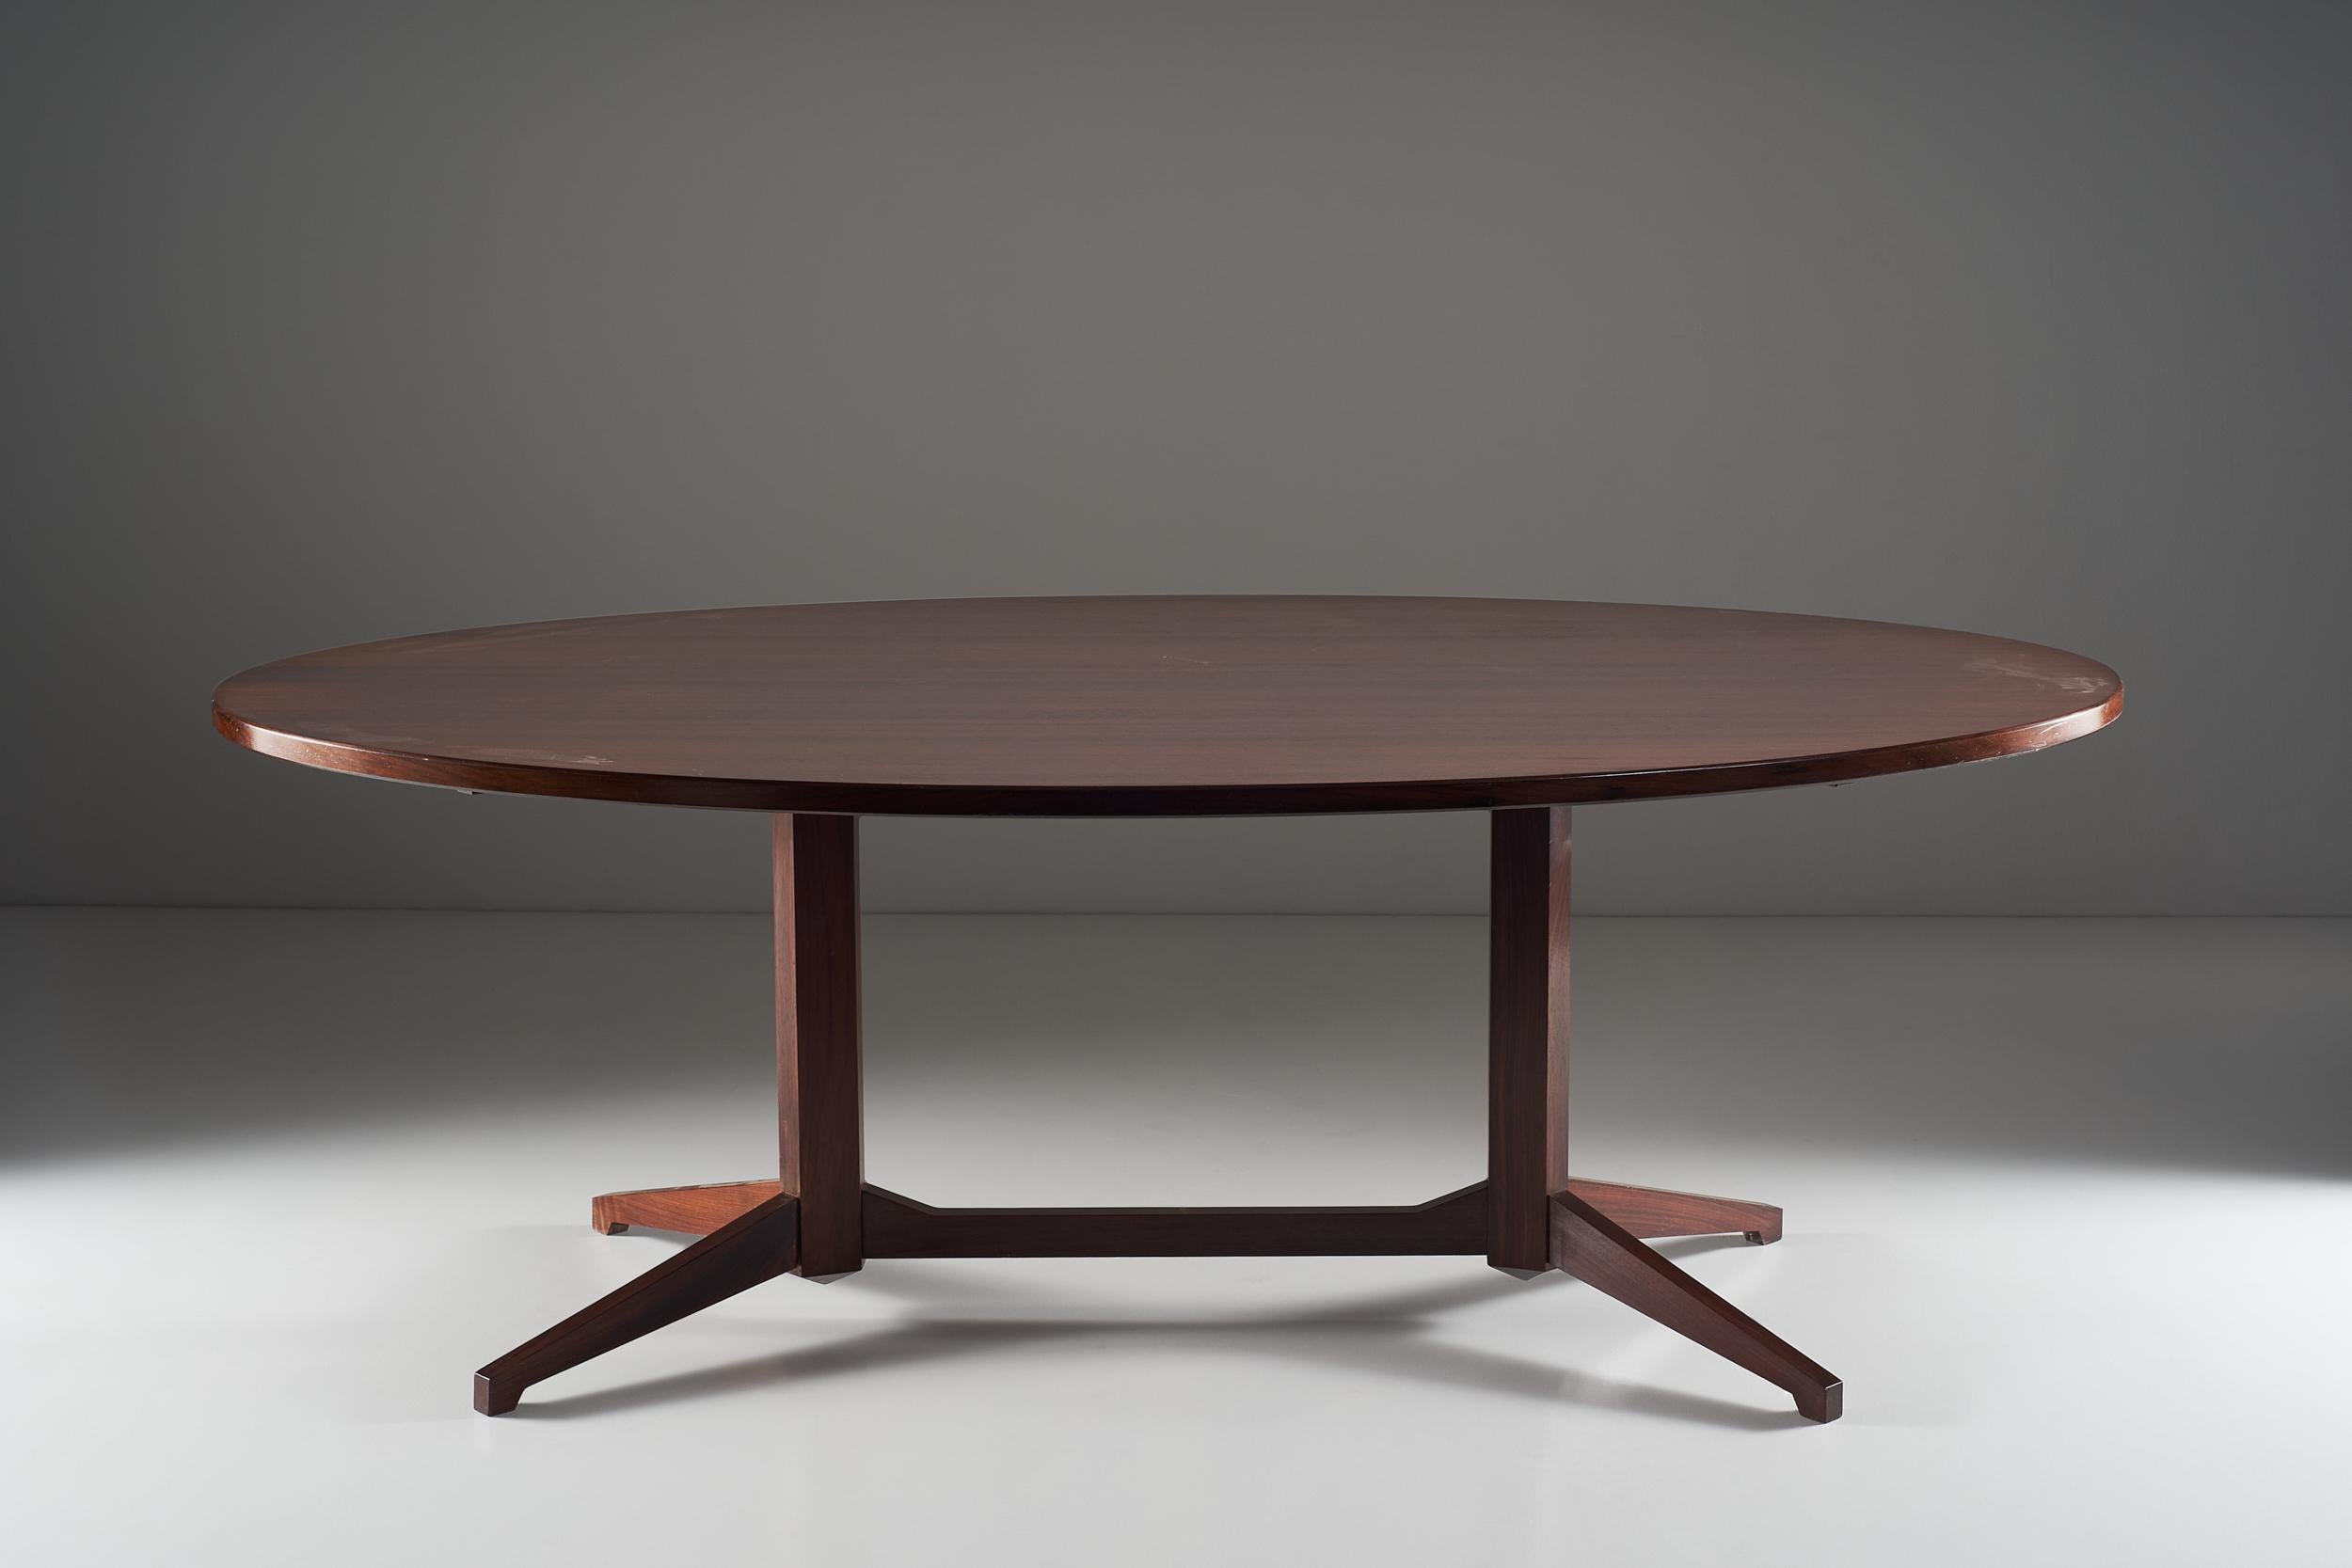 The TL22 is a table designed by Franco Albini and Franca Helg to have a cohesive and harmonious structural dimension. The table, exclusively in wood, is formed by a well-proportioned oval top, squashed along the wide lateral lines and closed more